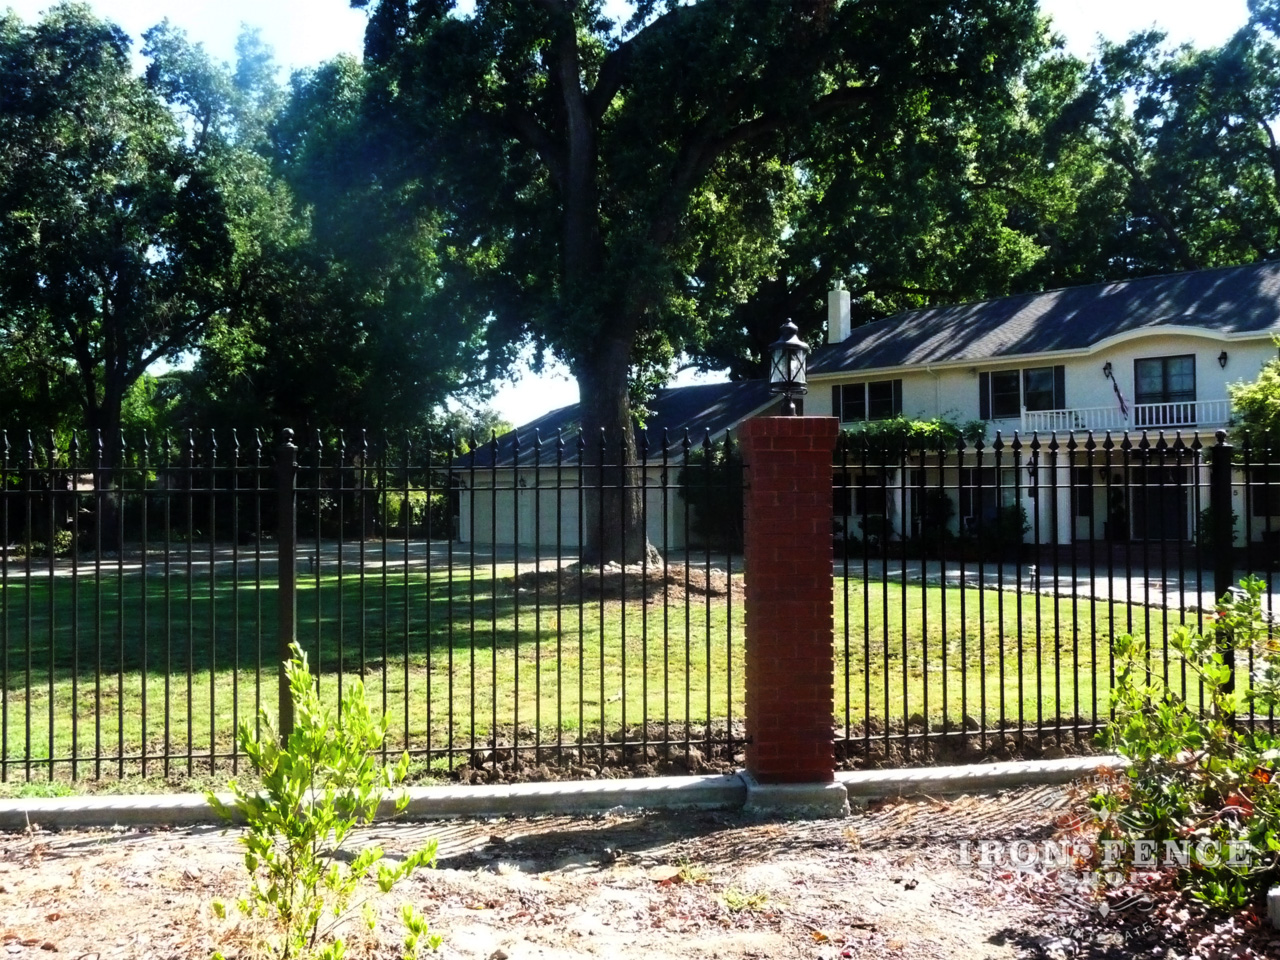 6ft Tall Signature Grade Iron Fence Mounted Directly to Brick Column with Small Knee Wall Underneath (Style #1: Classic)